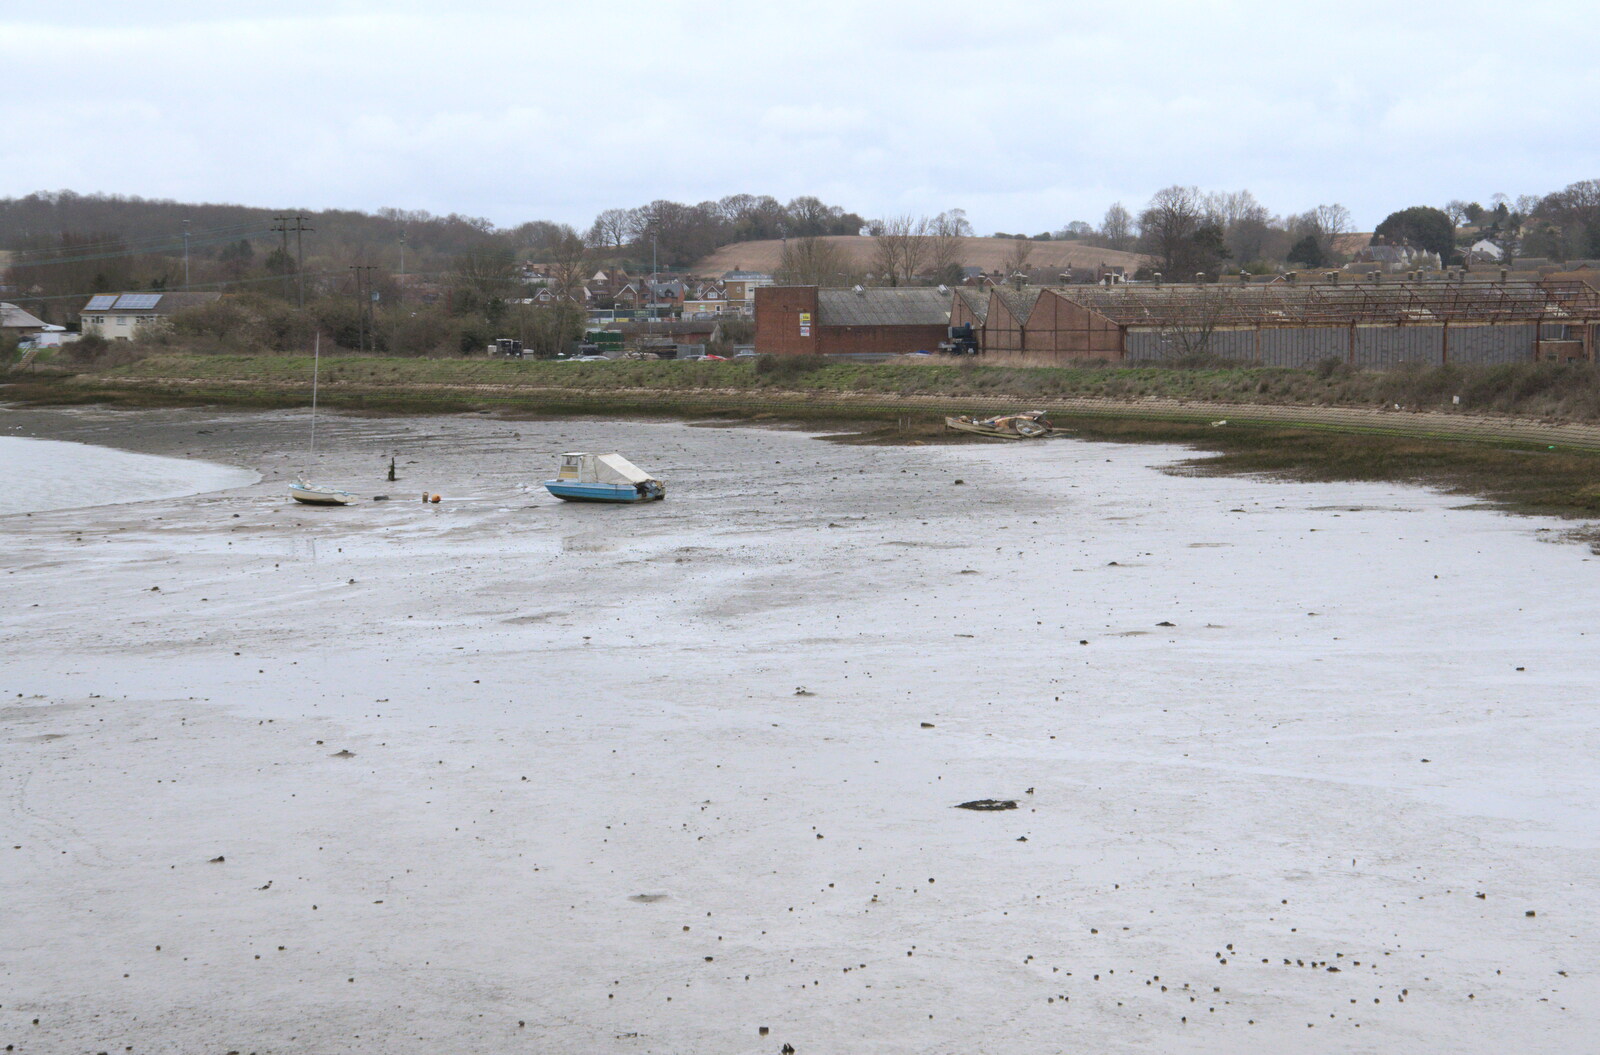 Mudflats at Brantham from A SwiftKey Memorial Service, Covent Garden, London  - 13th March 2020